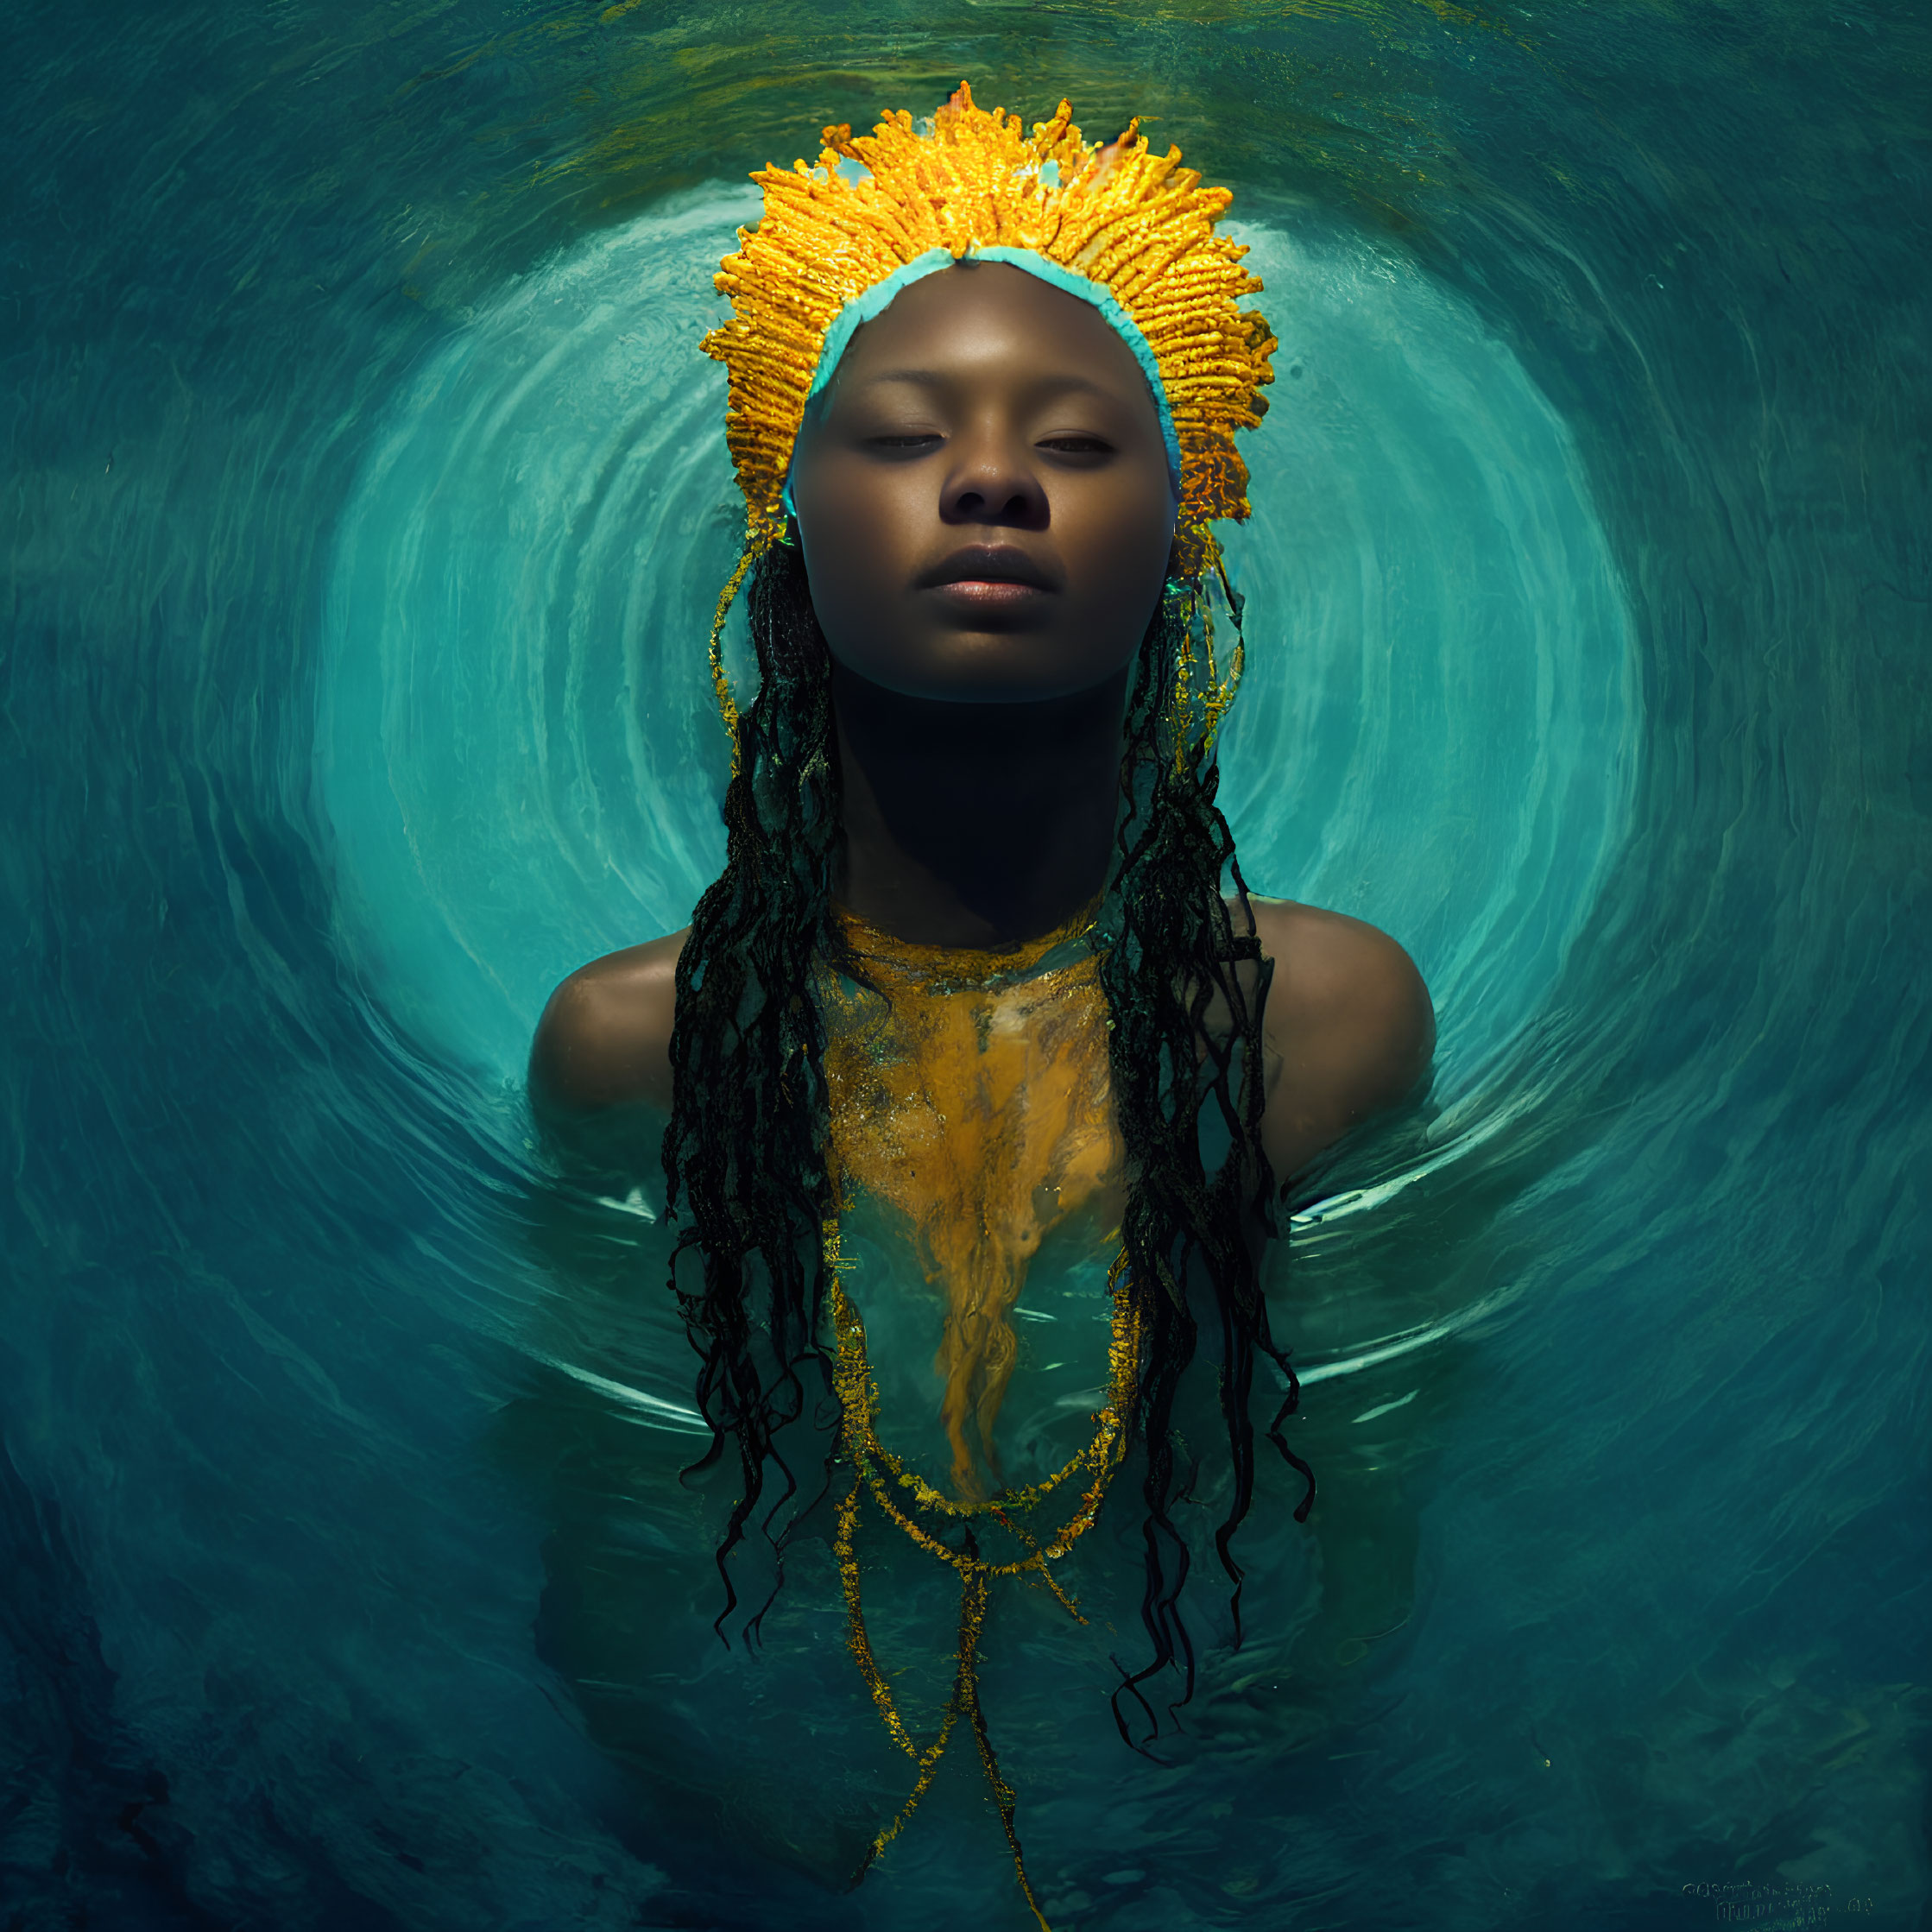 Person in Yellow Headpiece Emerges from Blue Waters